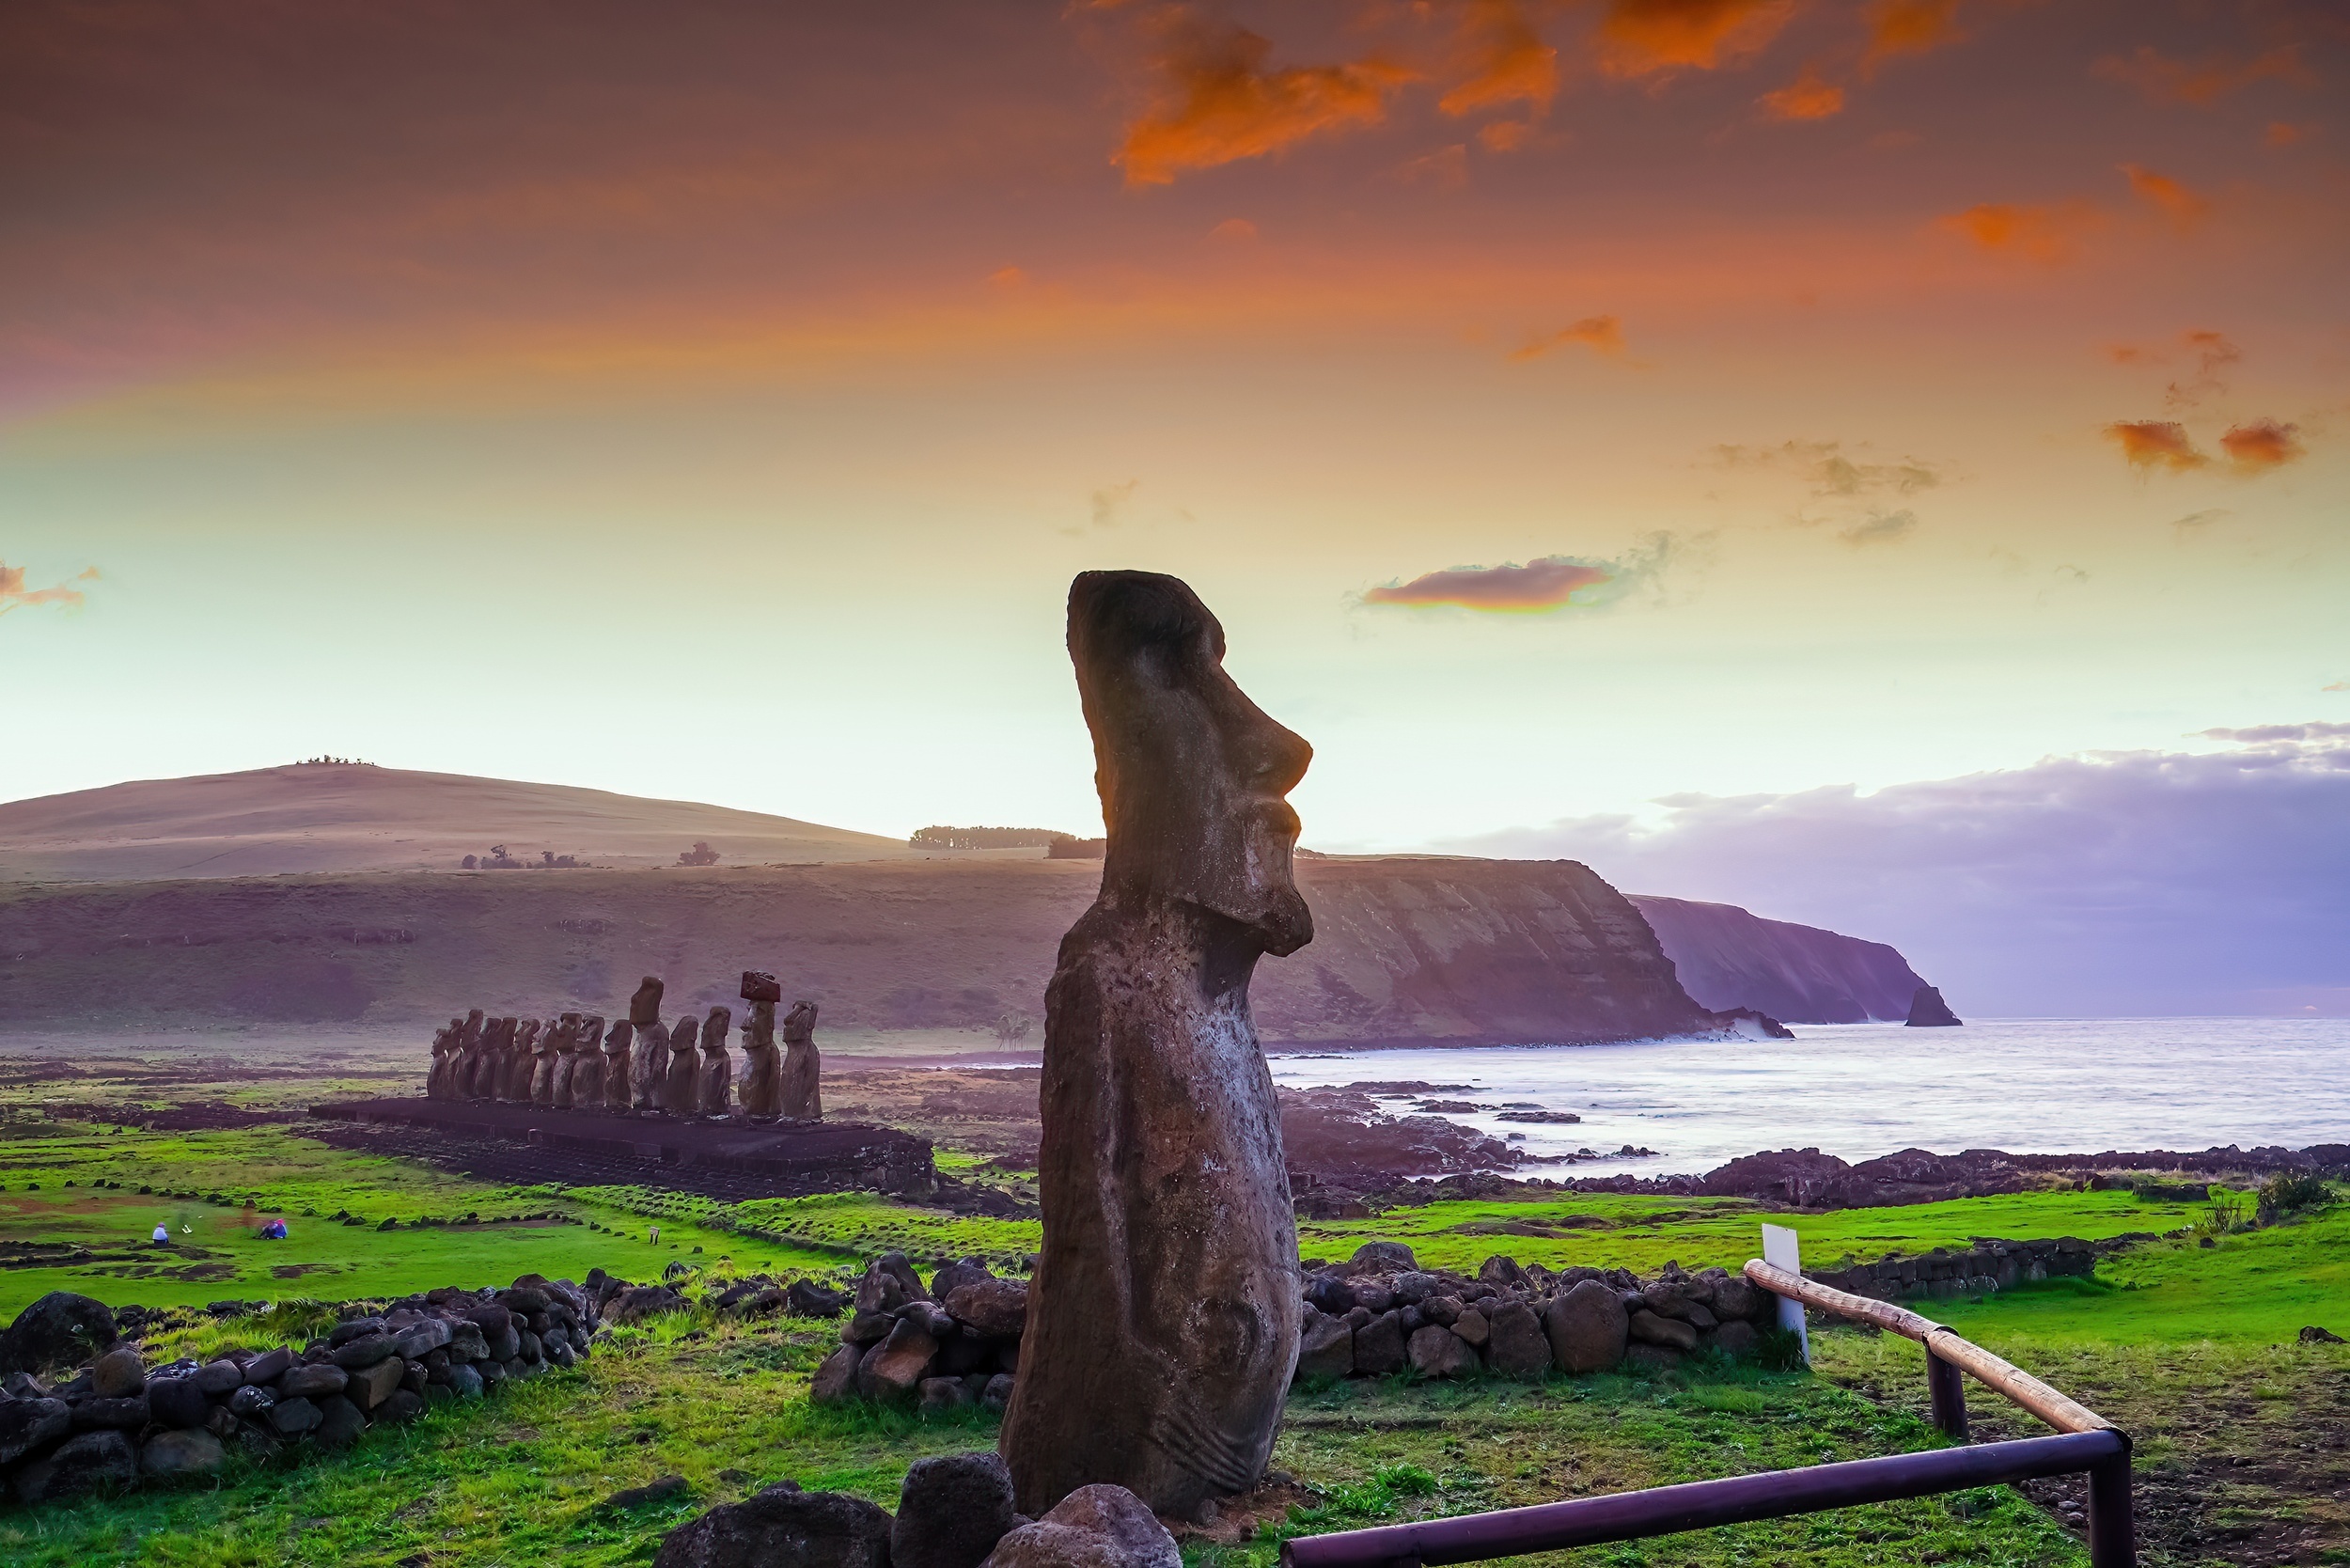 <p>For those who love history, mystery, and culture, Easter Island, way off the coast of Chile, is a worthy destination. There’s nothing but ocean for miles and miles, but once you reach the island, you’ll be floored by all there is to learn. </p><p>You may also like: <a href='https://www.yardbarker.com/lifestyle/articles/the_12_best_day_trips_from_european_cities/s1__38397783'>The 12 best day trips from European cities</a></p>